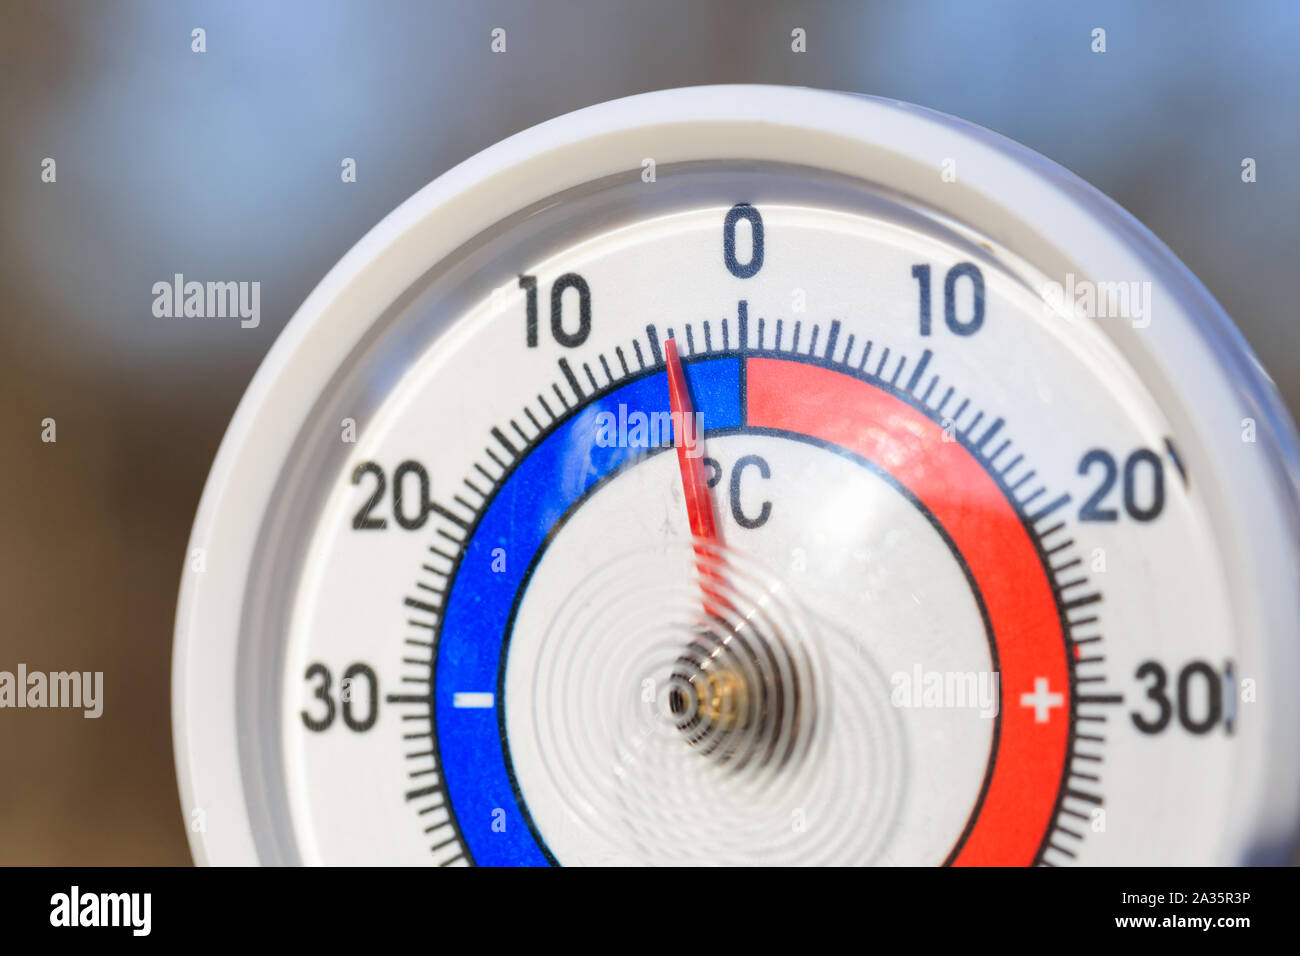 A Celsius thermometer on a window frame shows high temperatures of 43  degrees during an abnormal heat outside., Stock image